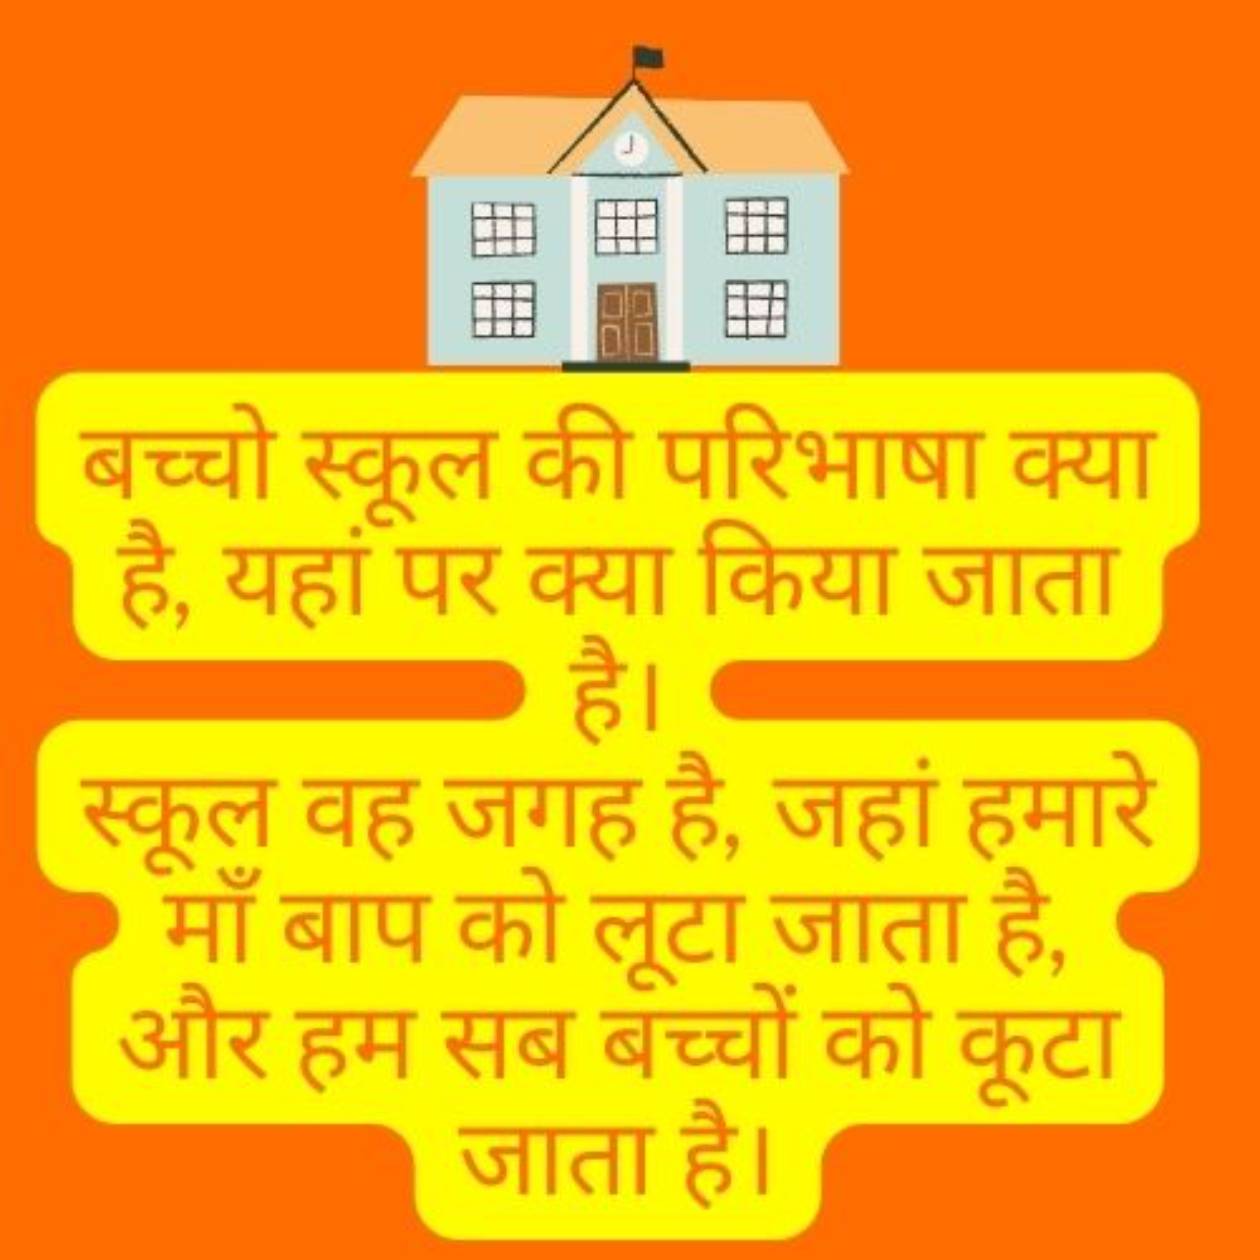 A school animation, and funny text in Hindi on the quality of school education.